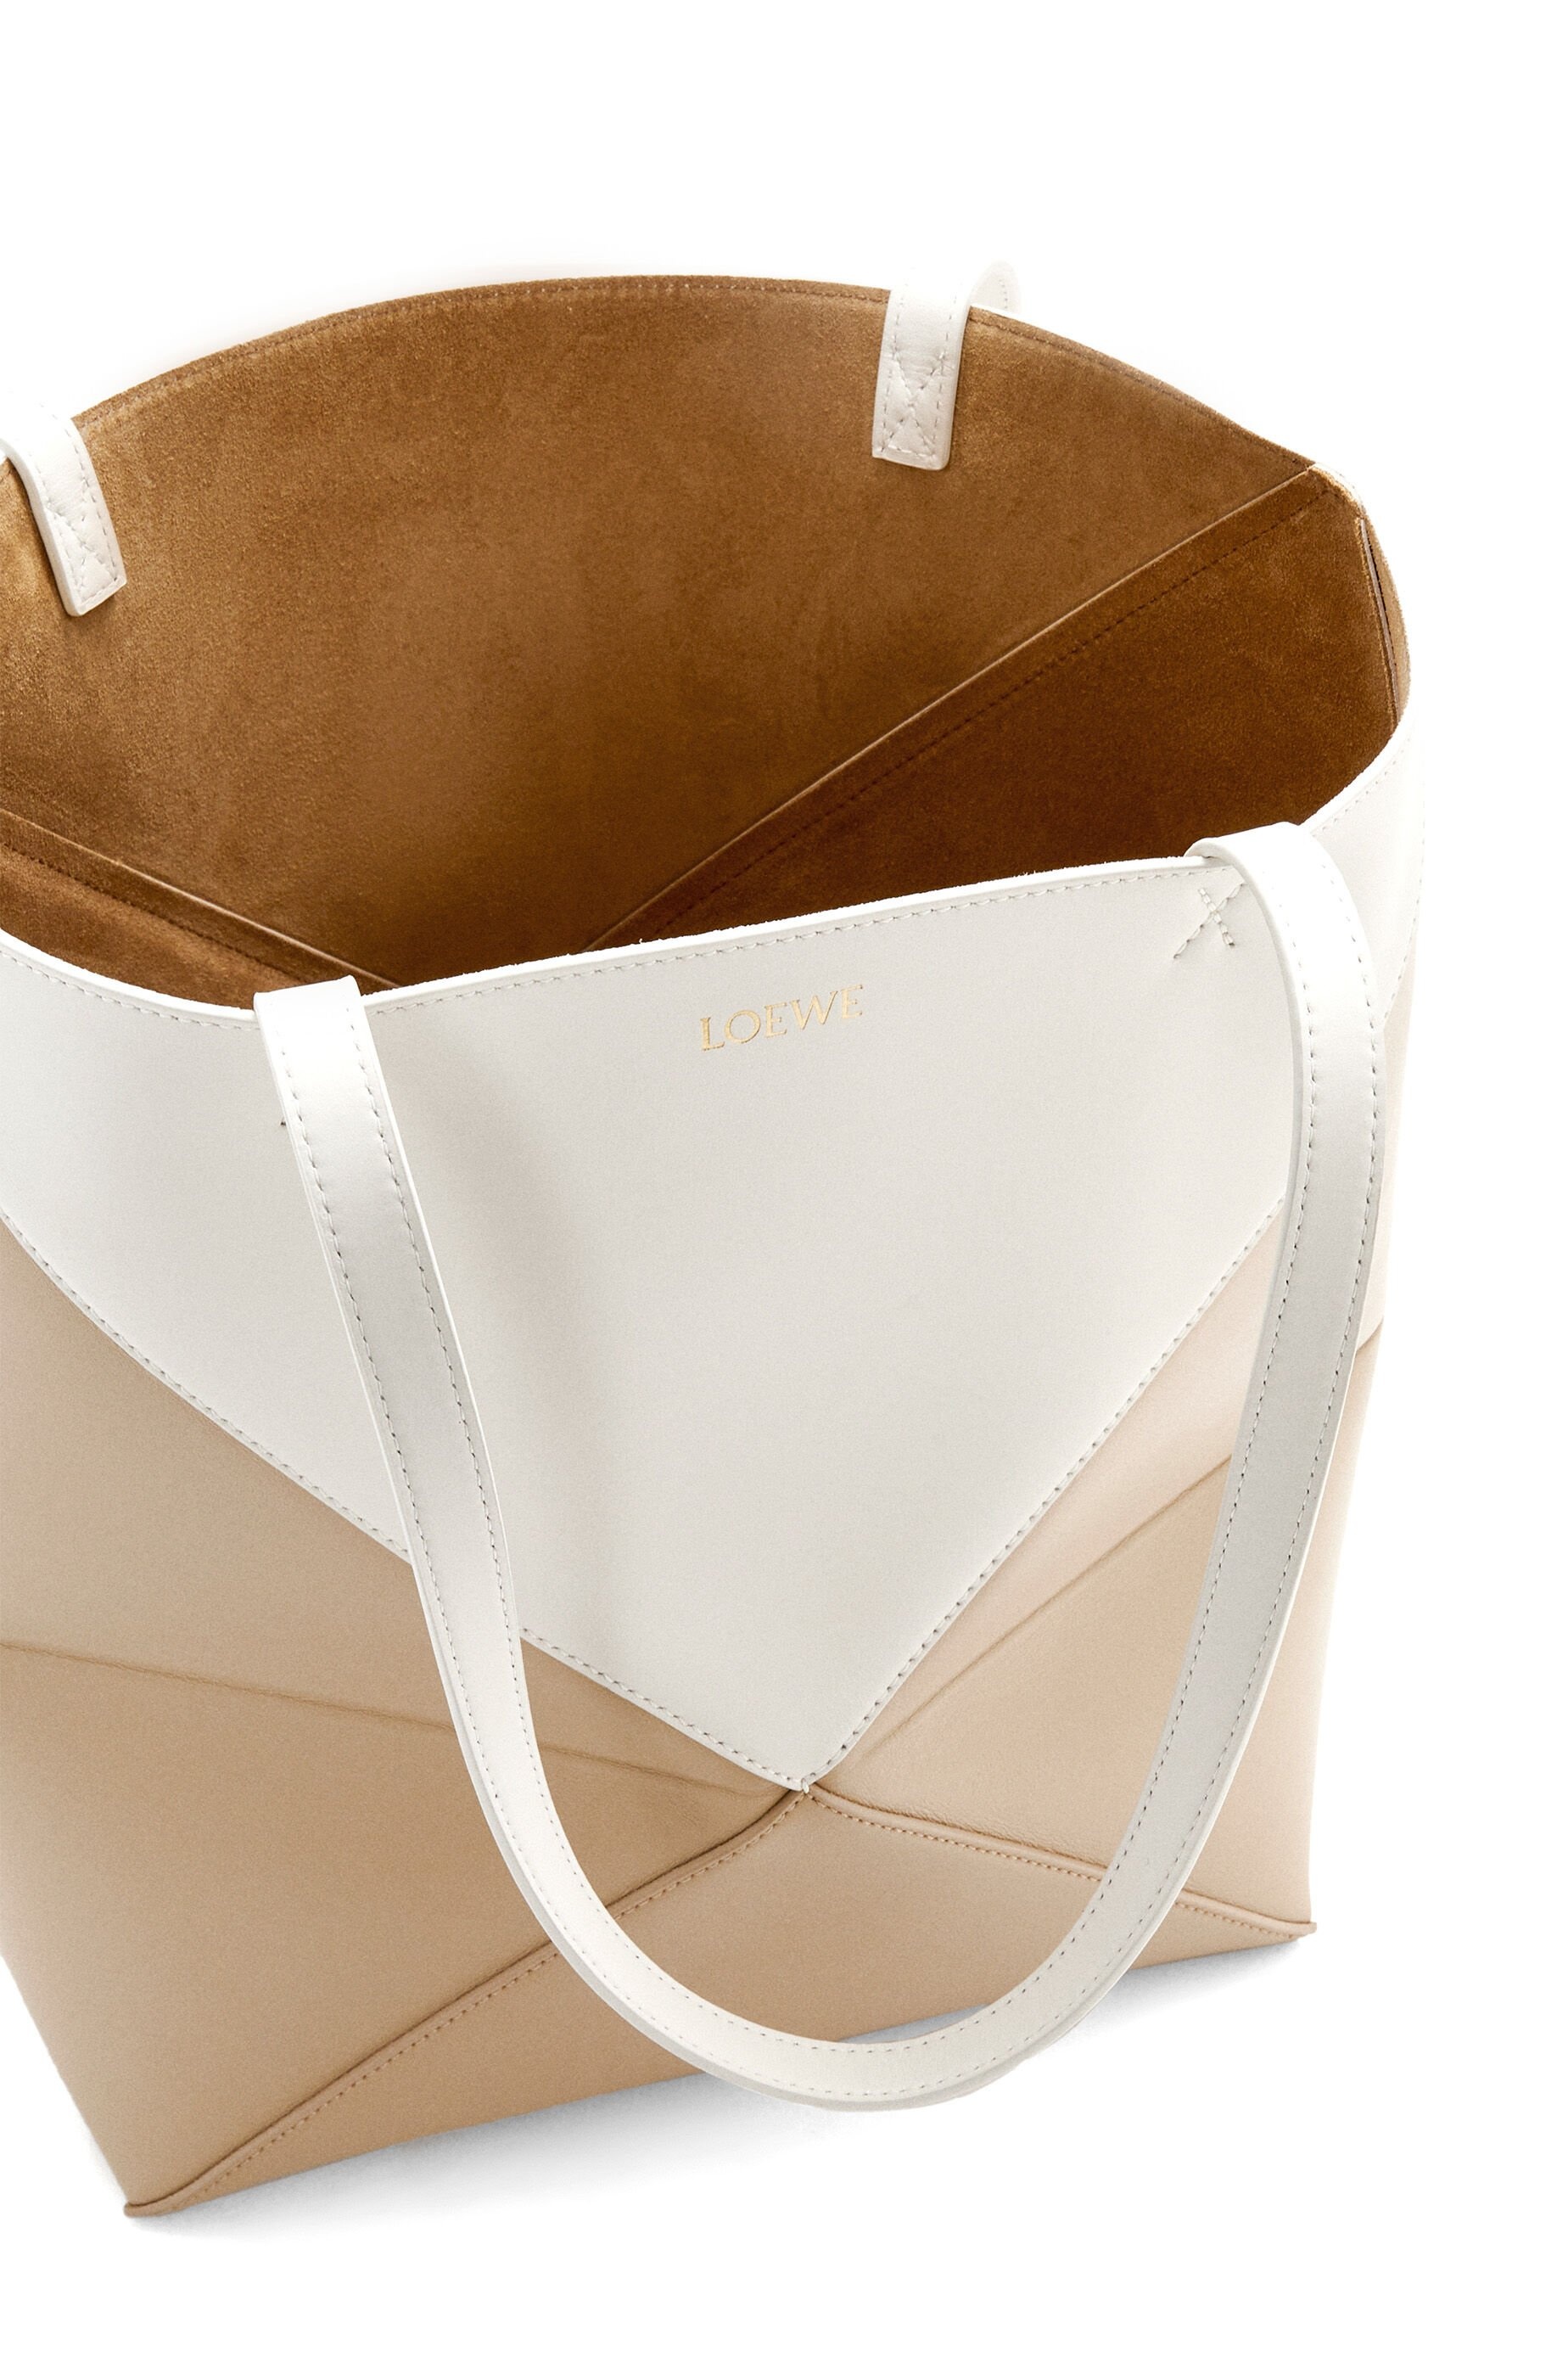 Puzzle Fold Tote in shiny calfskin - 9